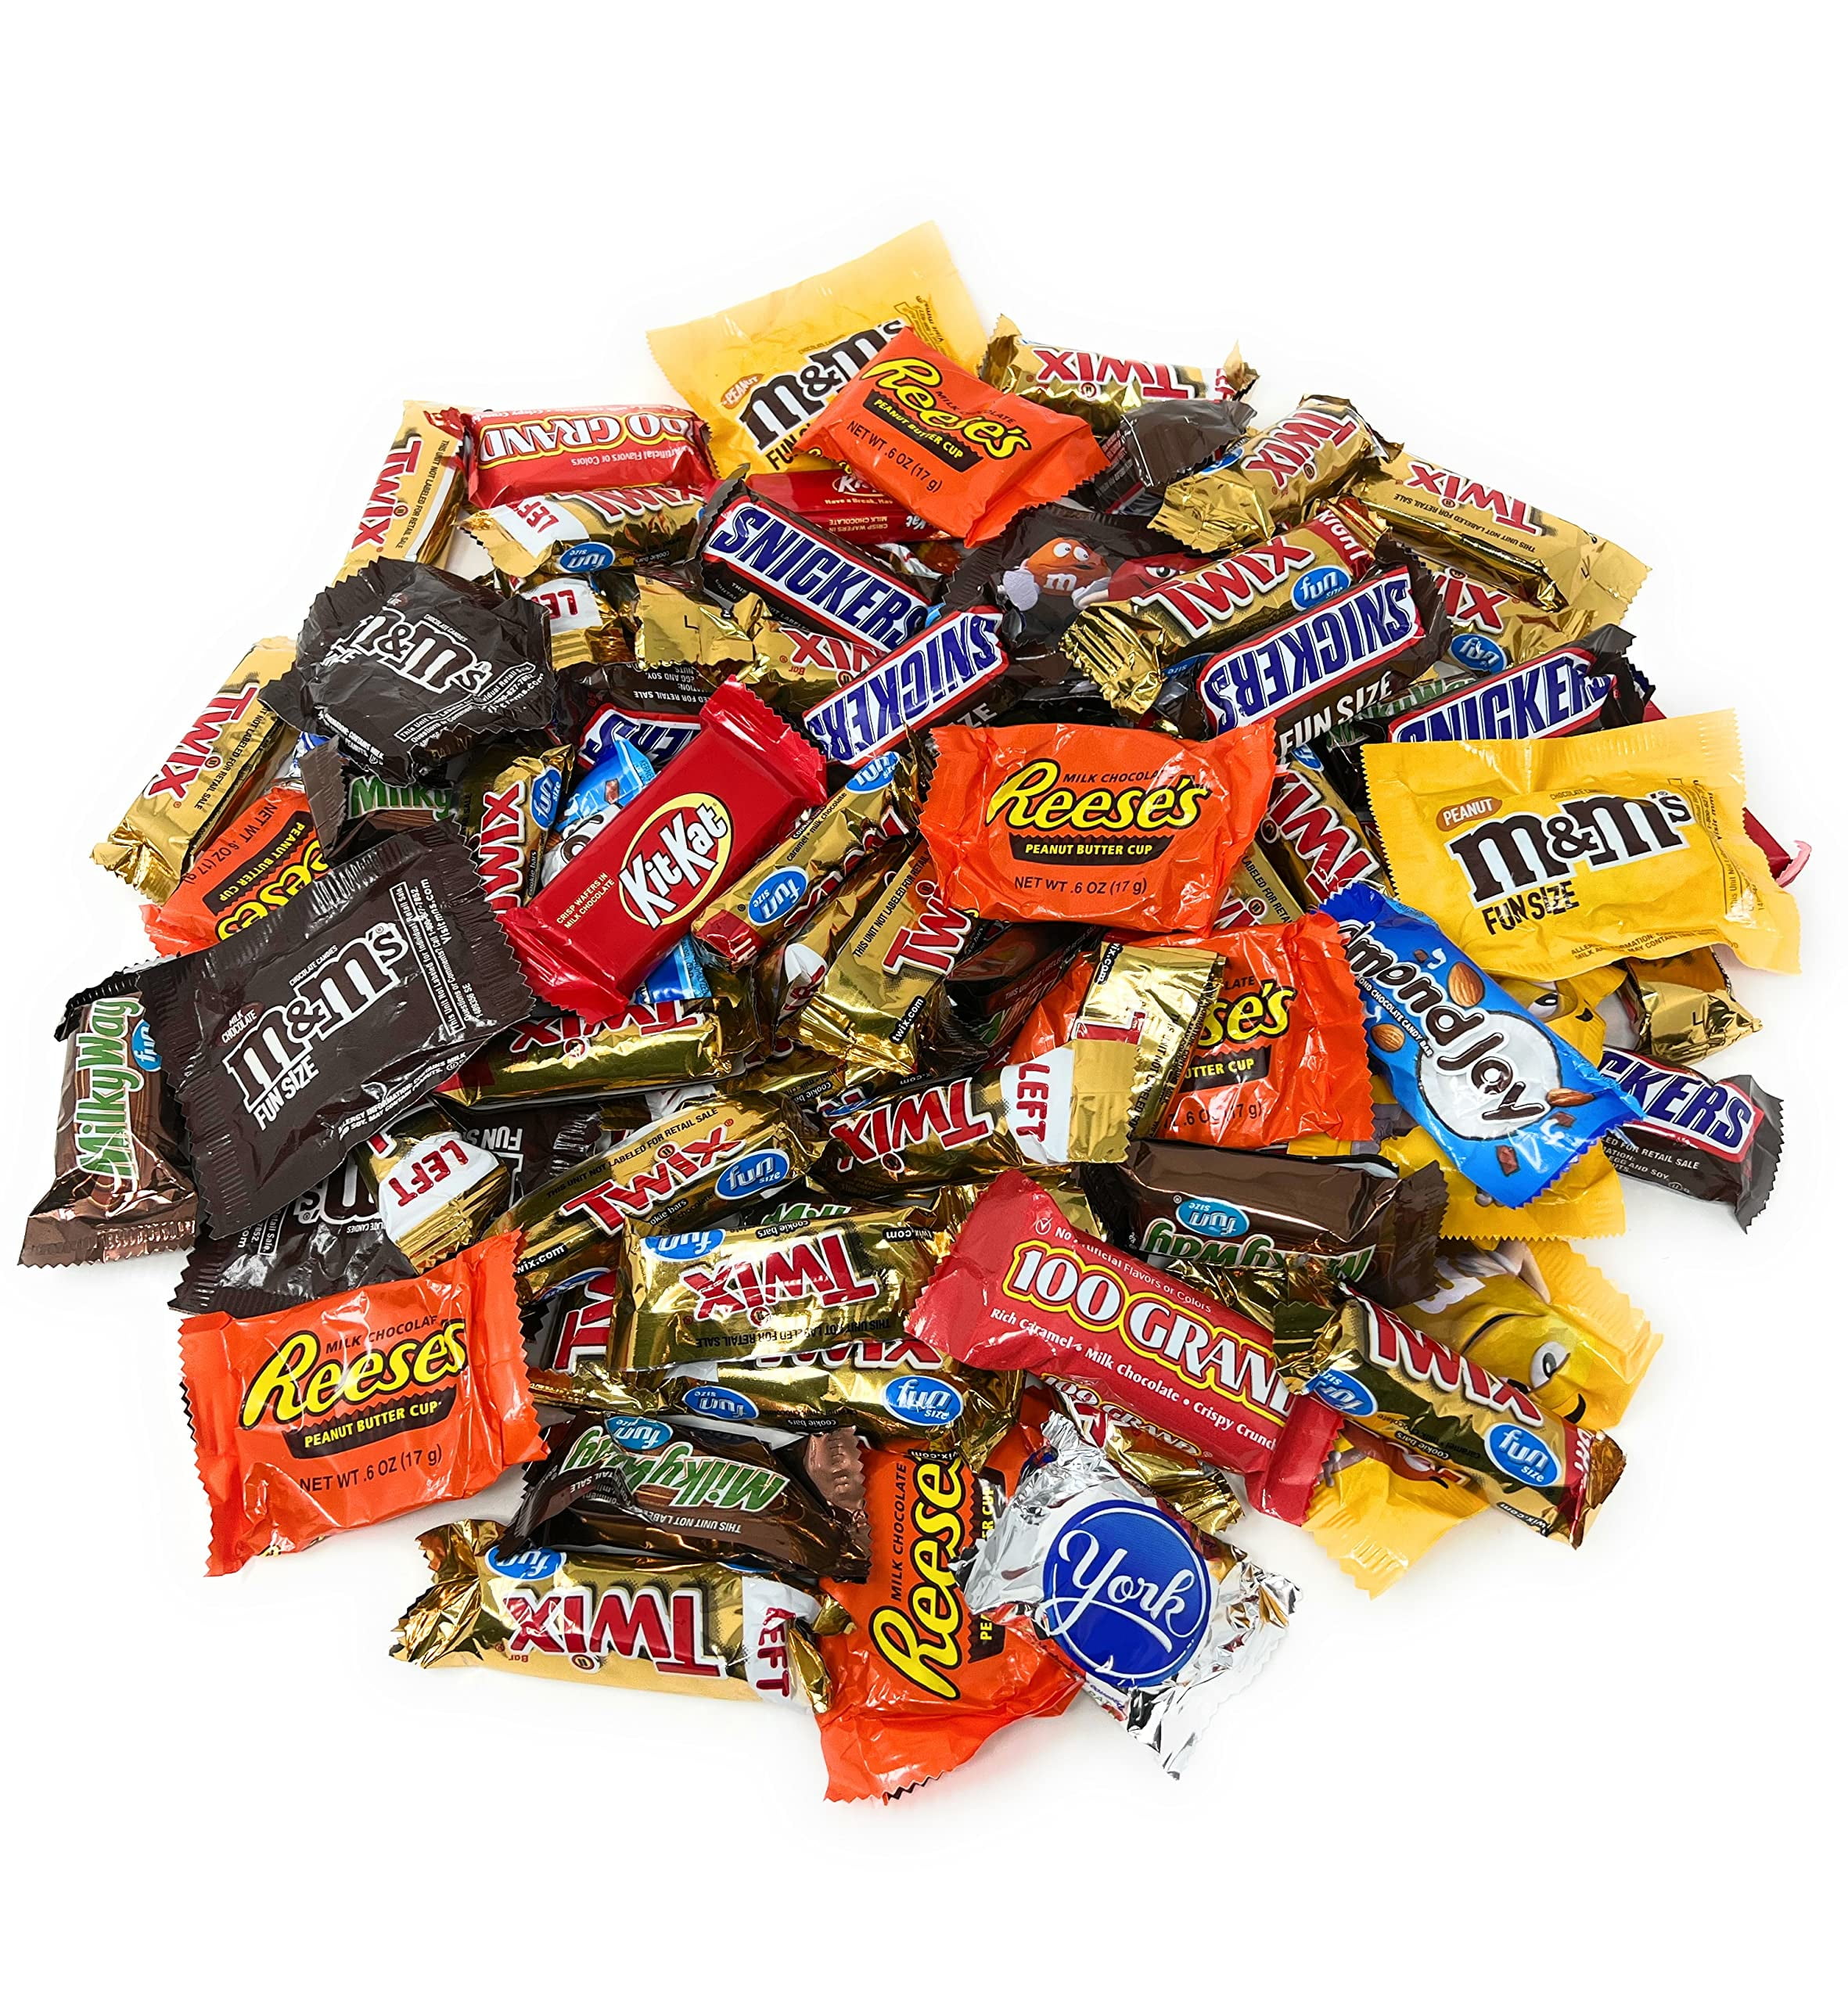  M&M's Milk Chocolate Candies Fun Size Bags - 3 lb. : Grocery &  Gourmet Food